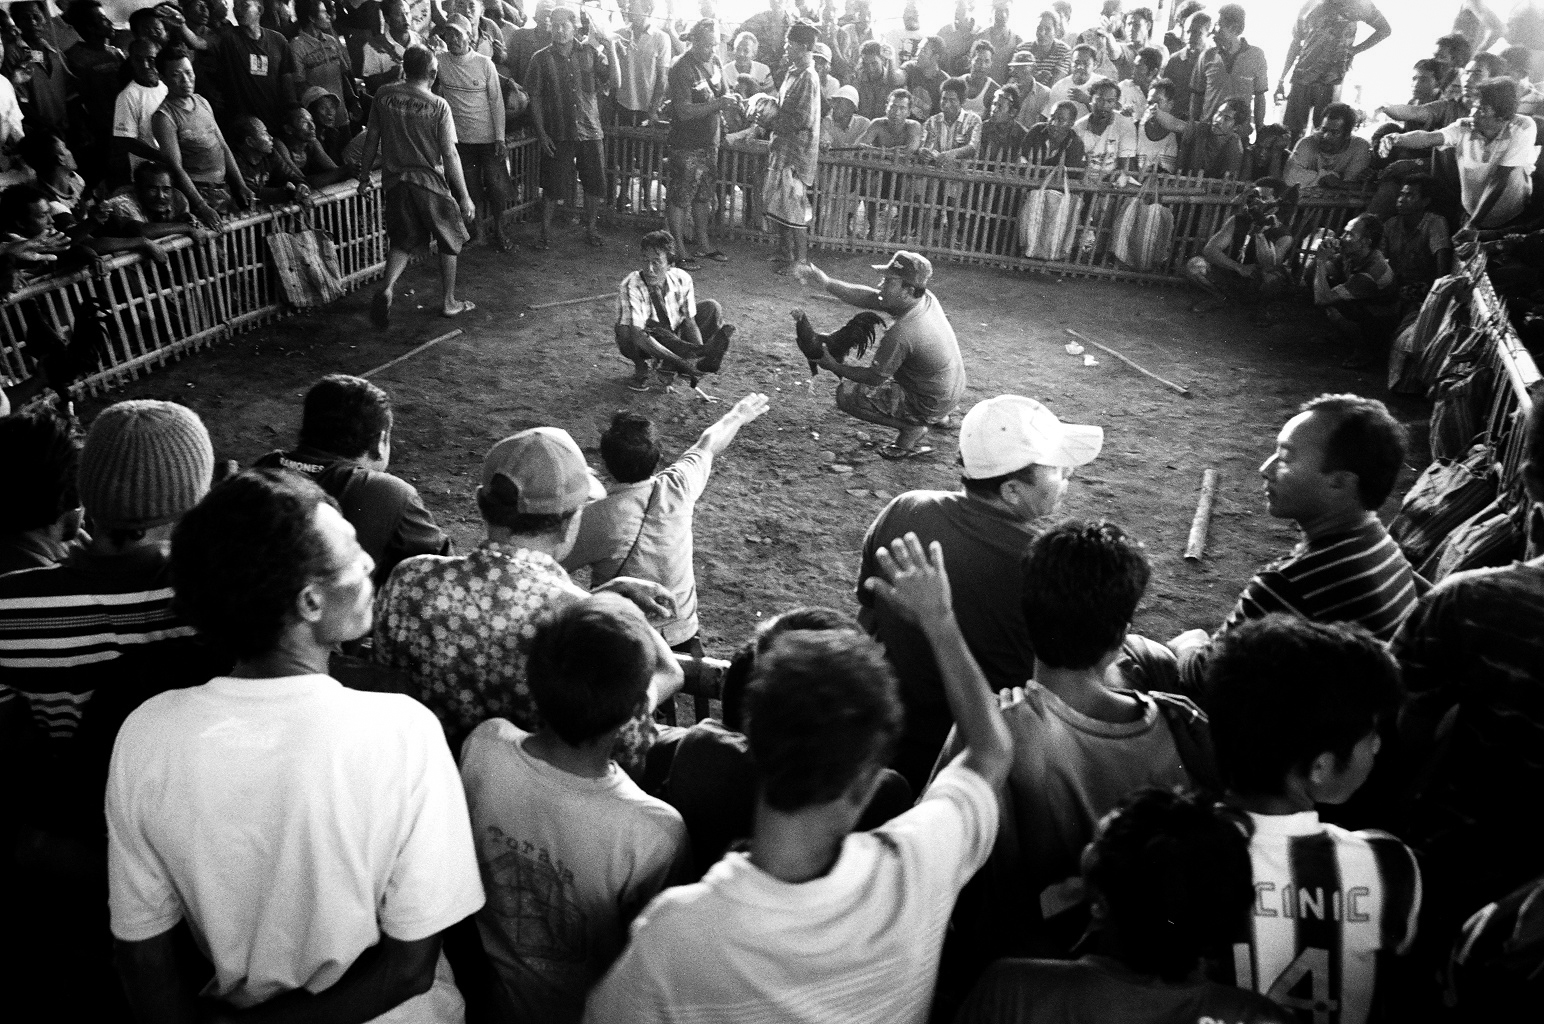  Amed, Bali, Indonesia. 2012.  Once the birds are ready to fight, they are placed face to face by their handlers. The spectators then begin chanting and placing bets on their favorite fighter. 